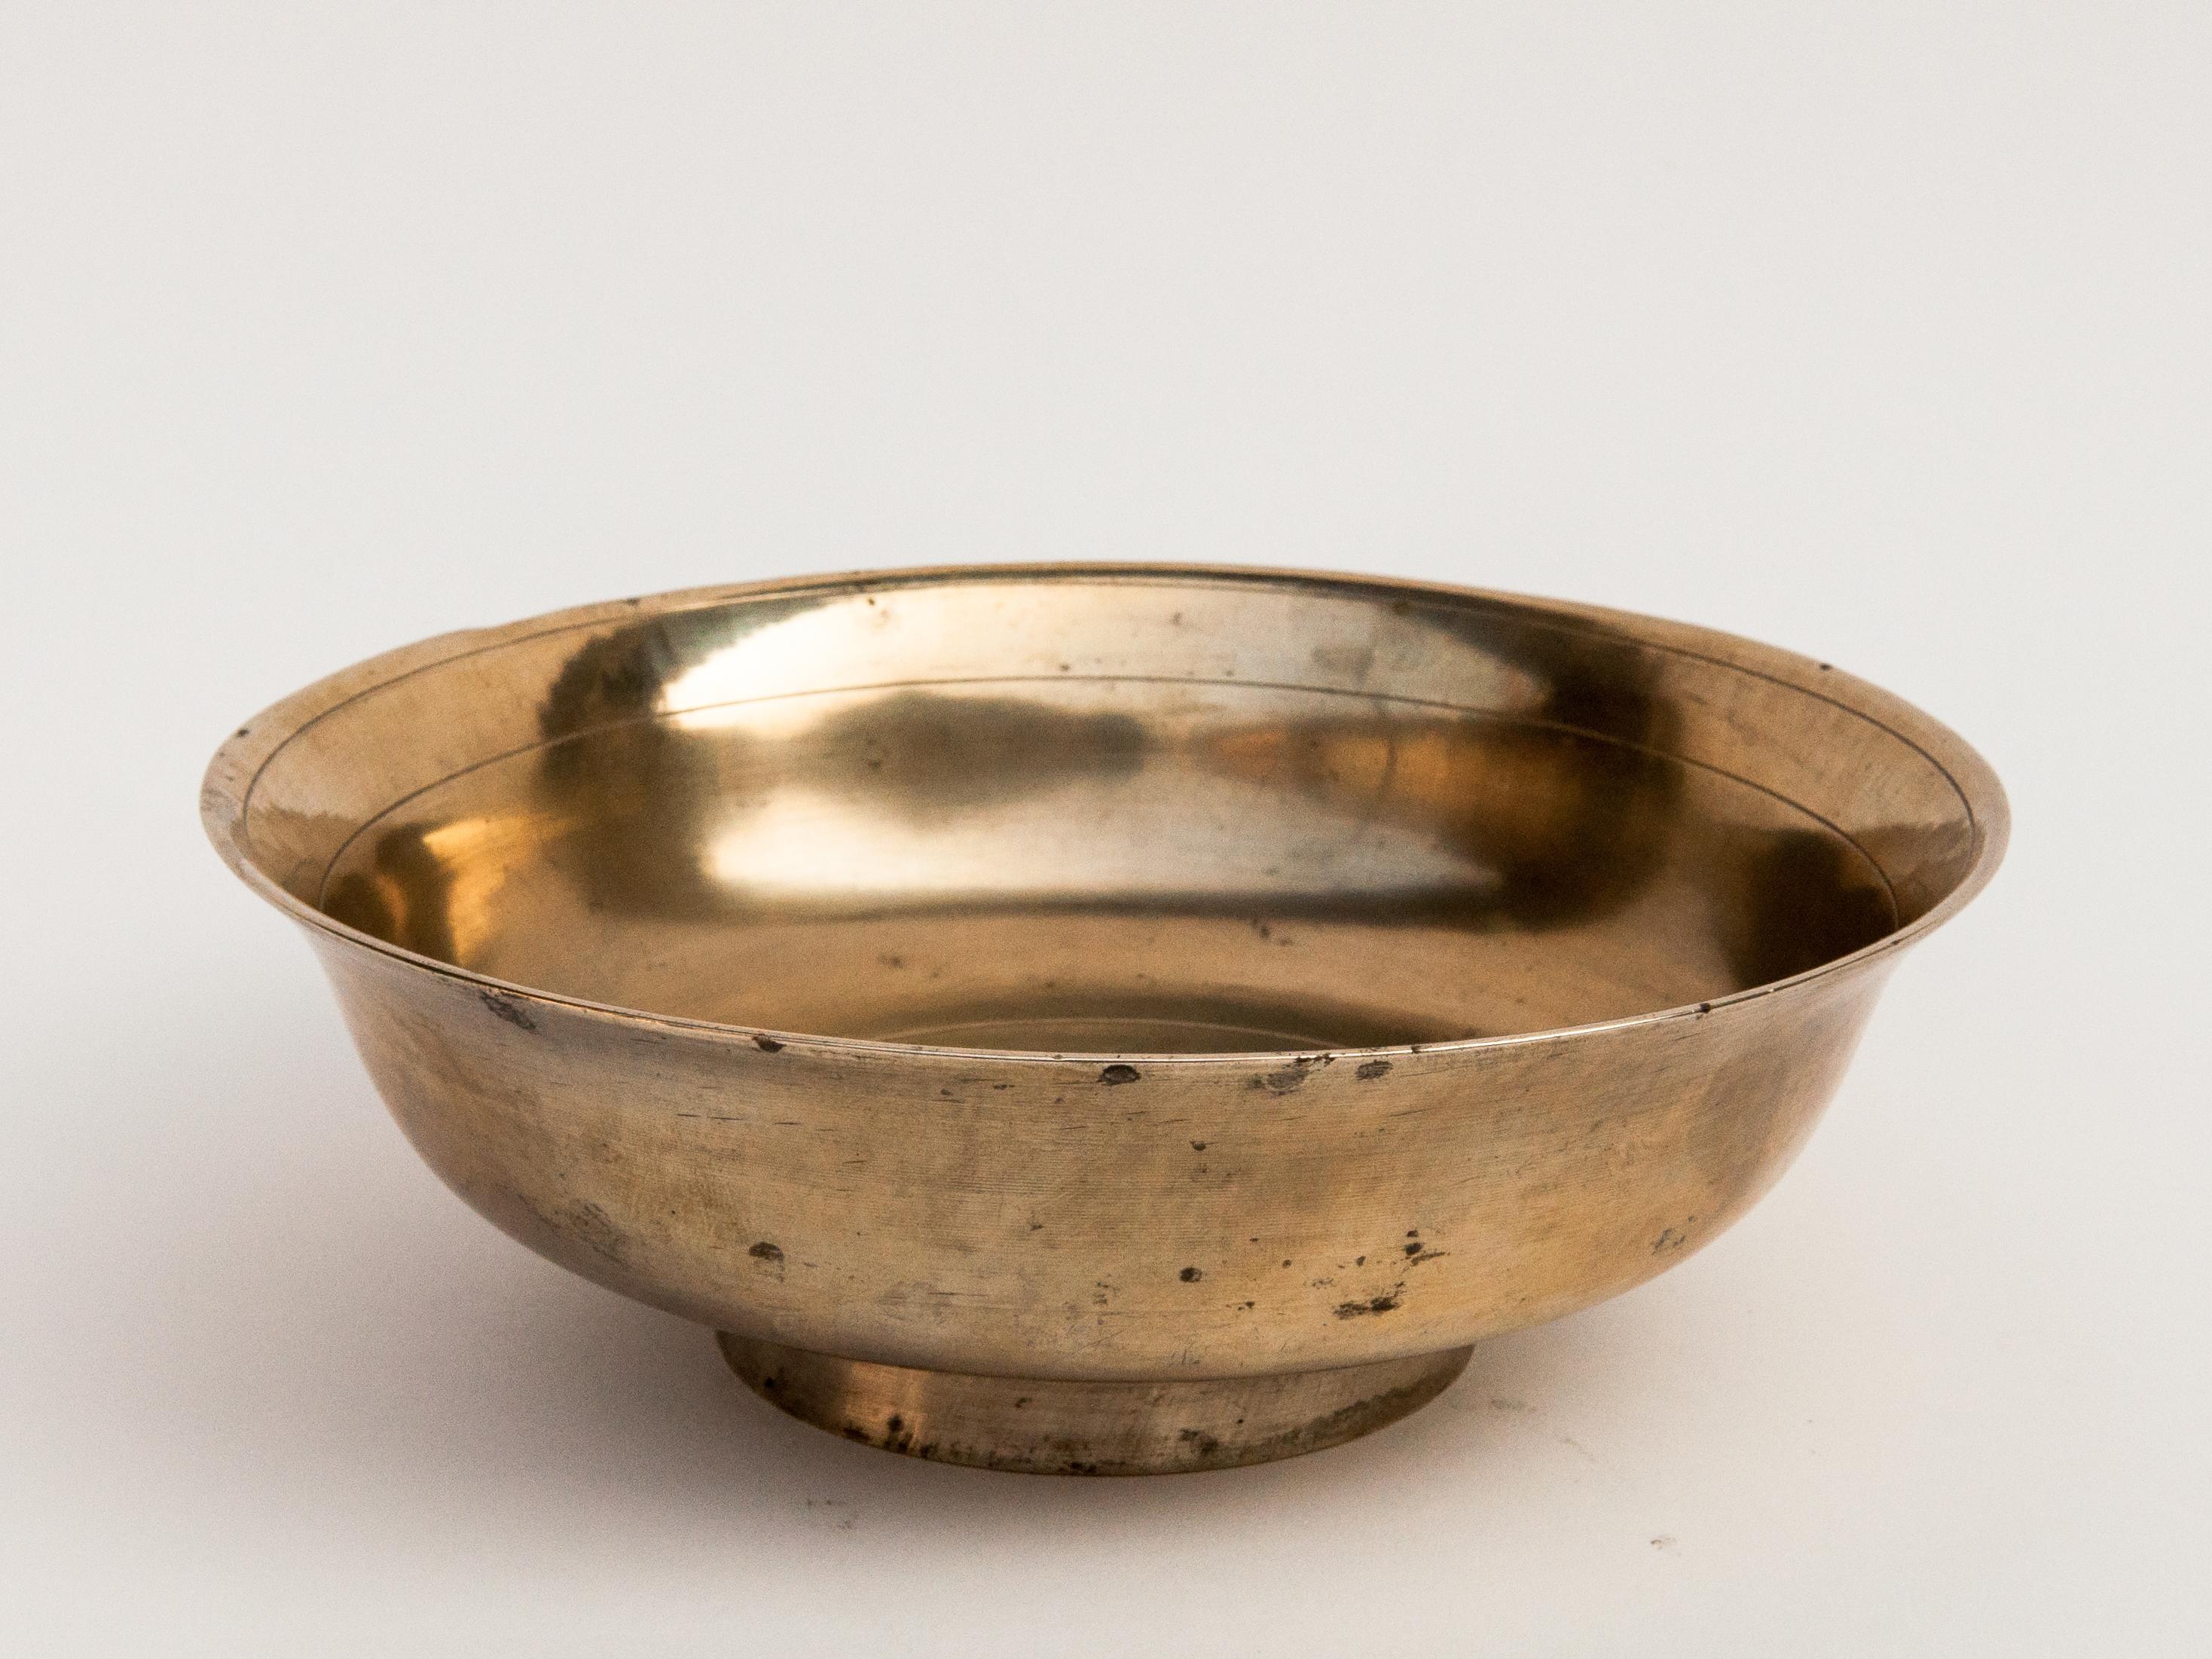 Vintage Tibetan Tsampa bowl, bronze, large. From Nepal or Tibet, mid-20th century
offered by Bruce Hughes.
Tsampa is a Tibetan staple found throughout Tibet as well as among the Tibetan speaking peoples of the high Himalayan valleys of the India /